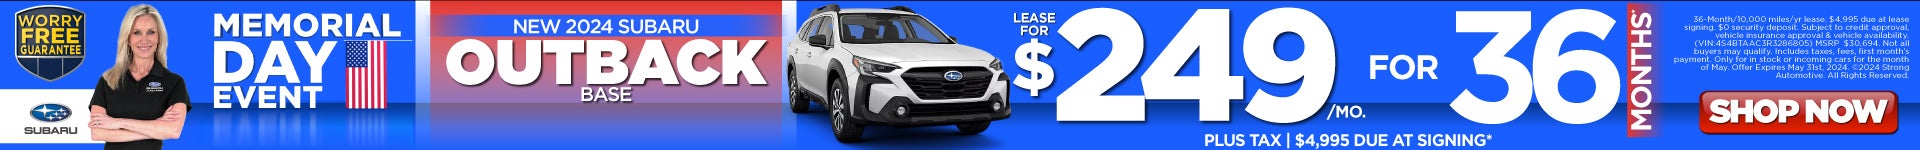 New 2024 Subaru Outback - Lease for $249/mo* - Shop Now